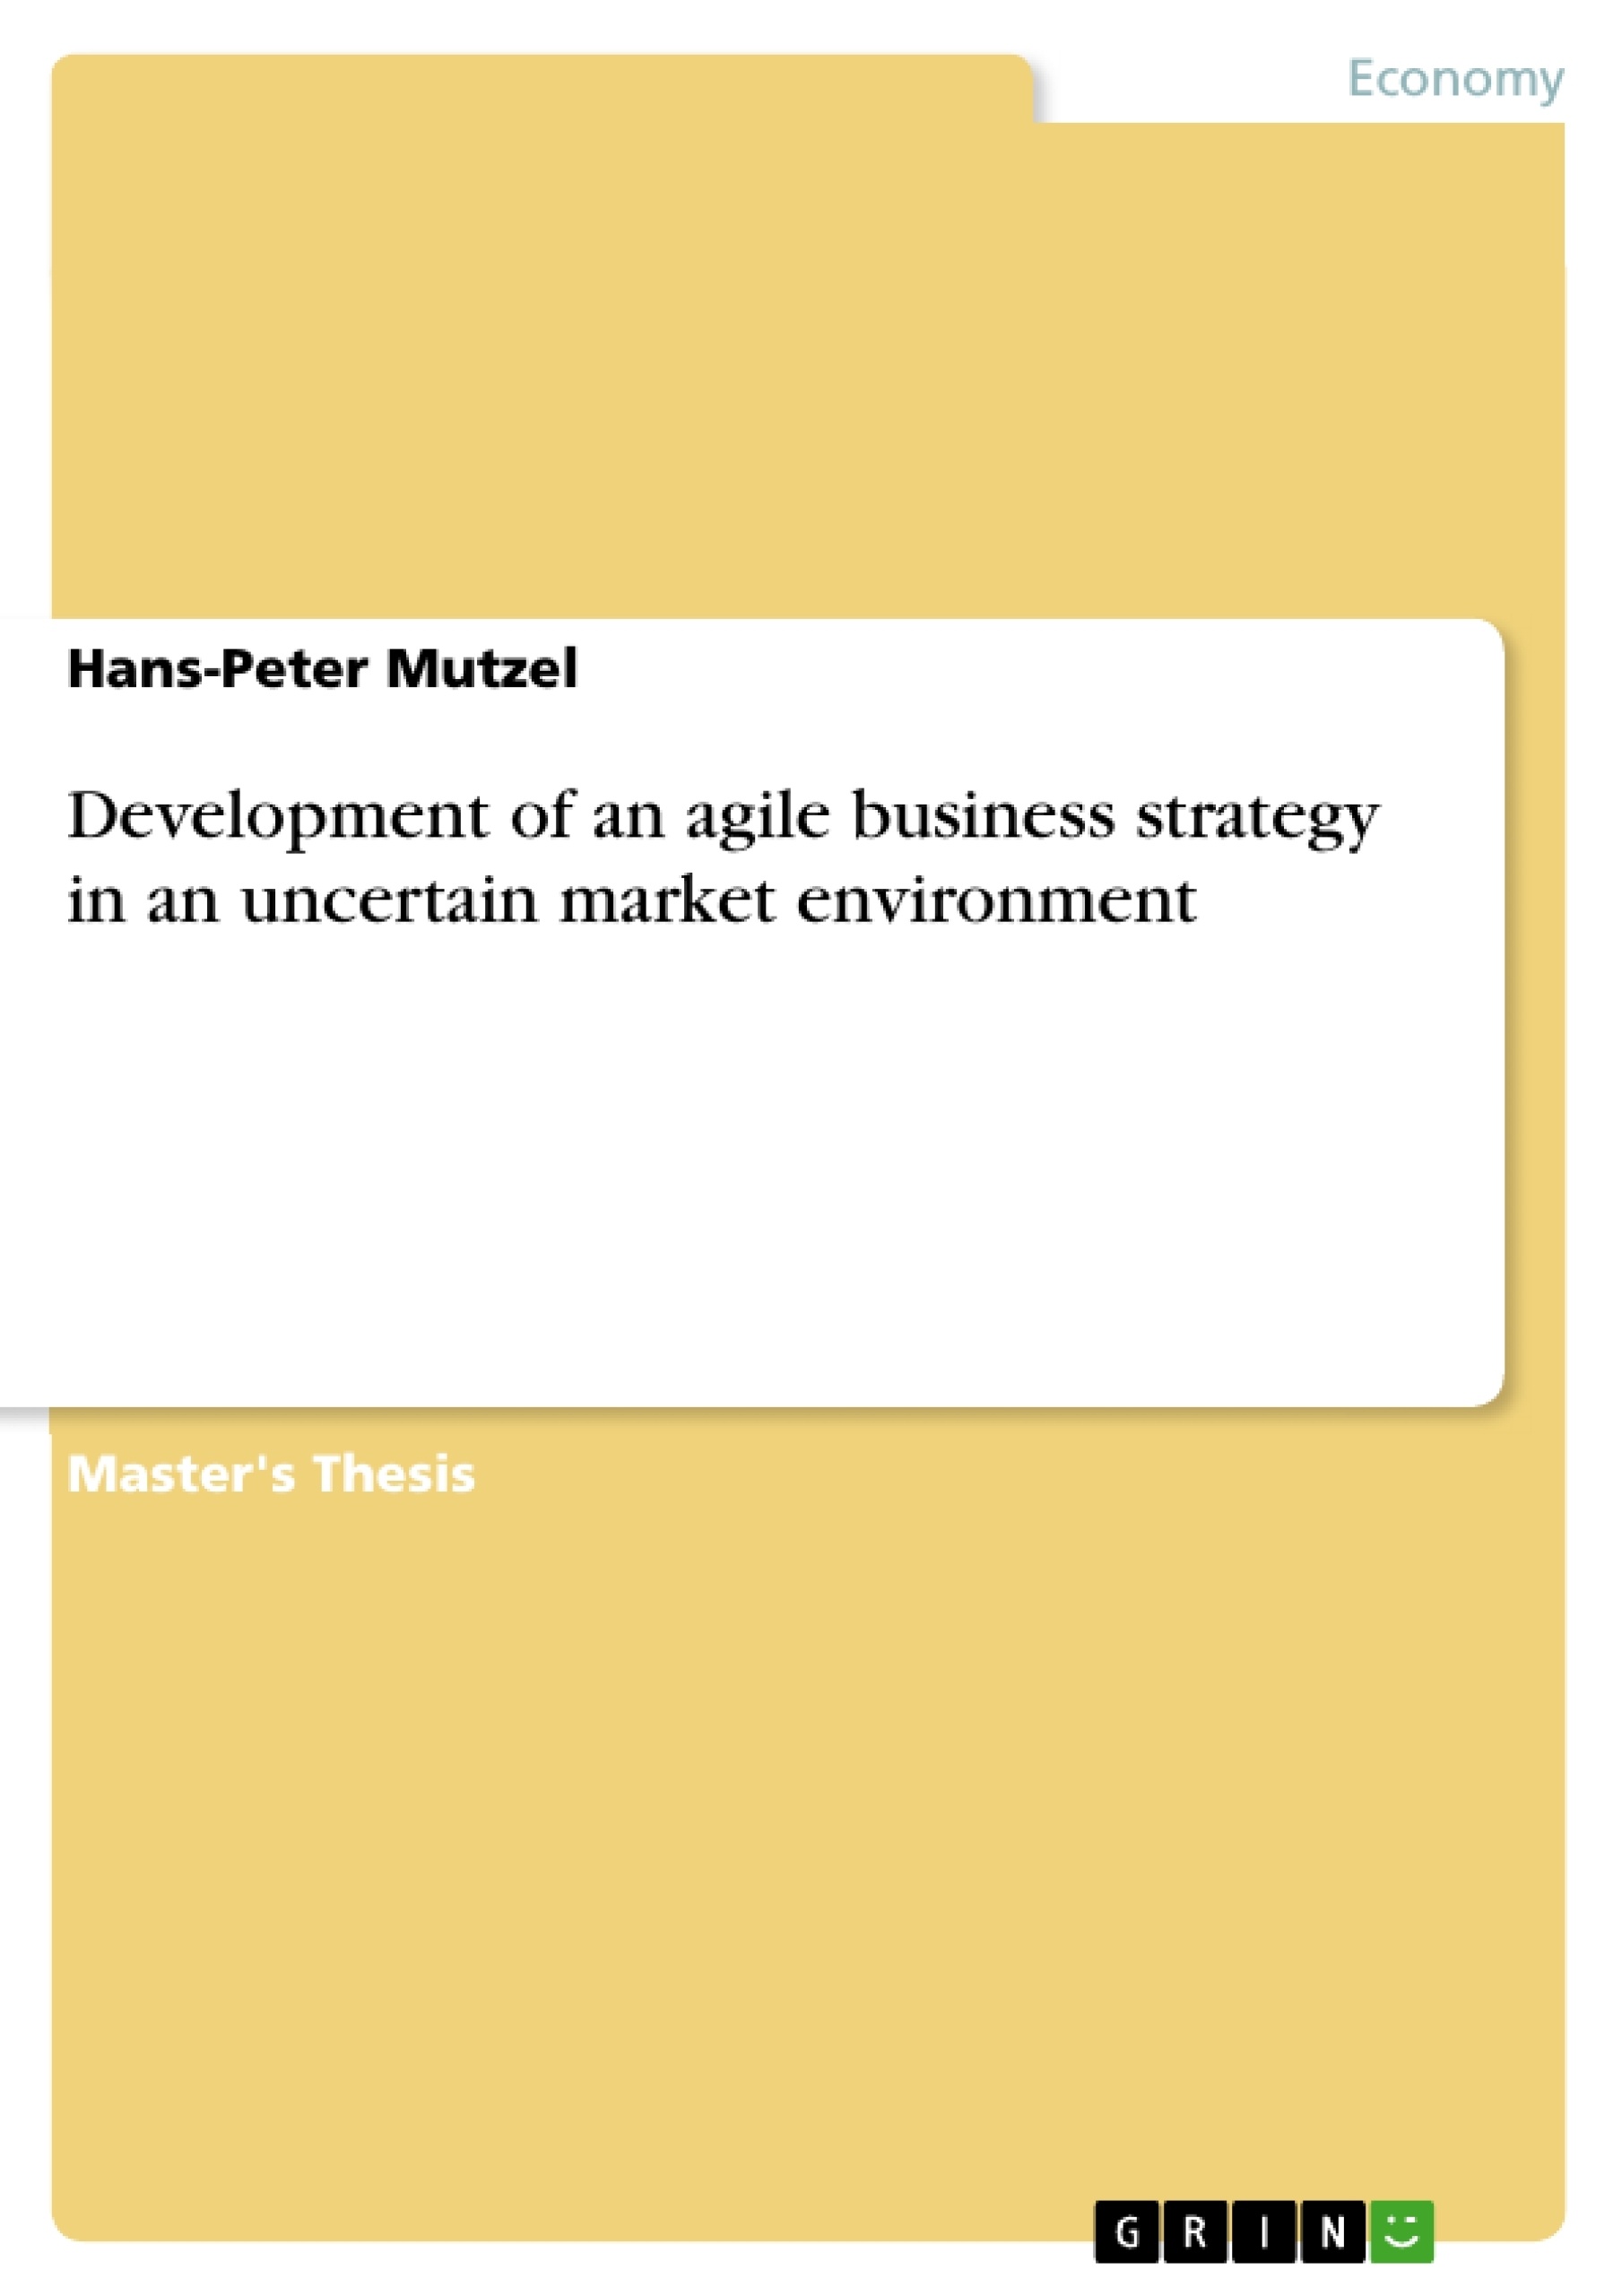 Title: Development of an agile business strategy in an uncertain market environment